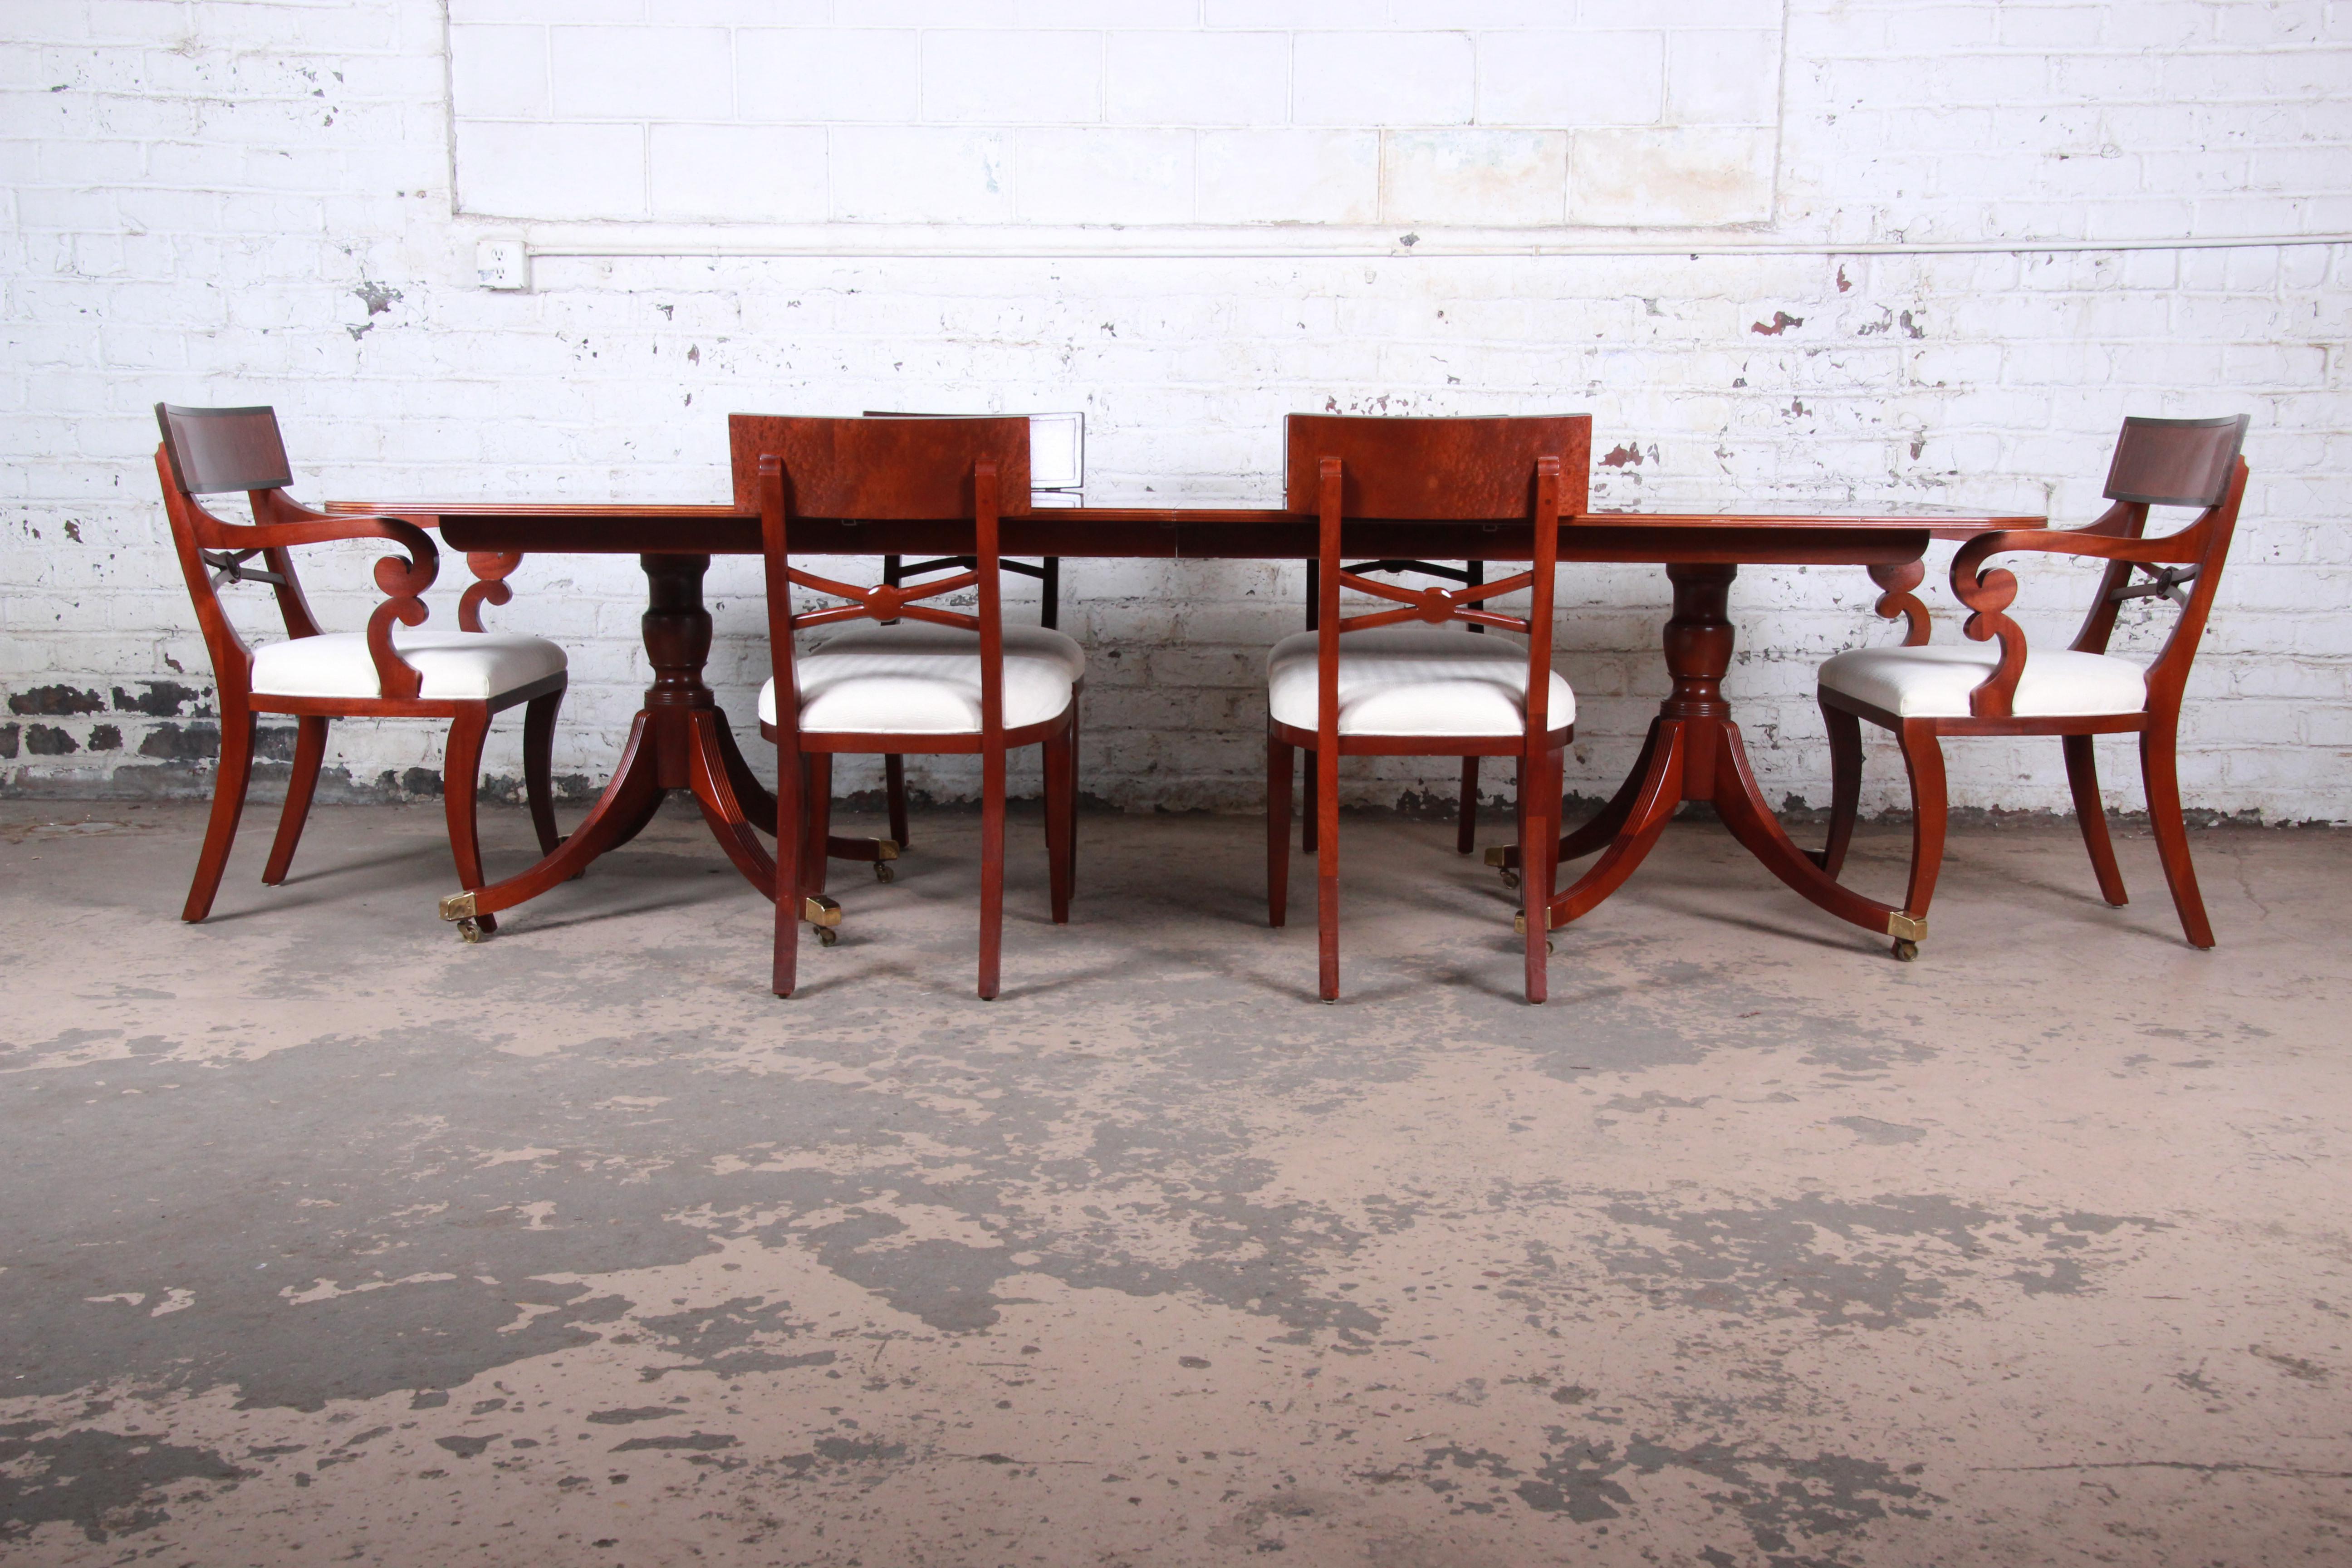 An exceptional Georgian banded and inlaid mahogany dining table and chairs from the Historic Charleston Collection by Baker Furniture. The set includes the extension dining table with two leaves and six chairs. The double pedestal table features